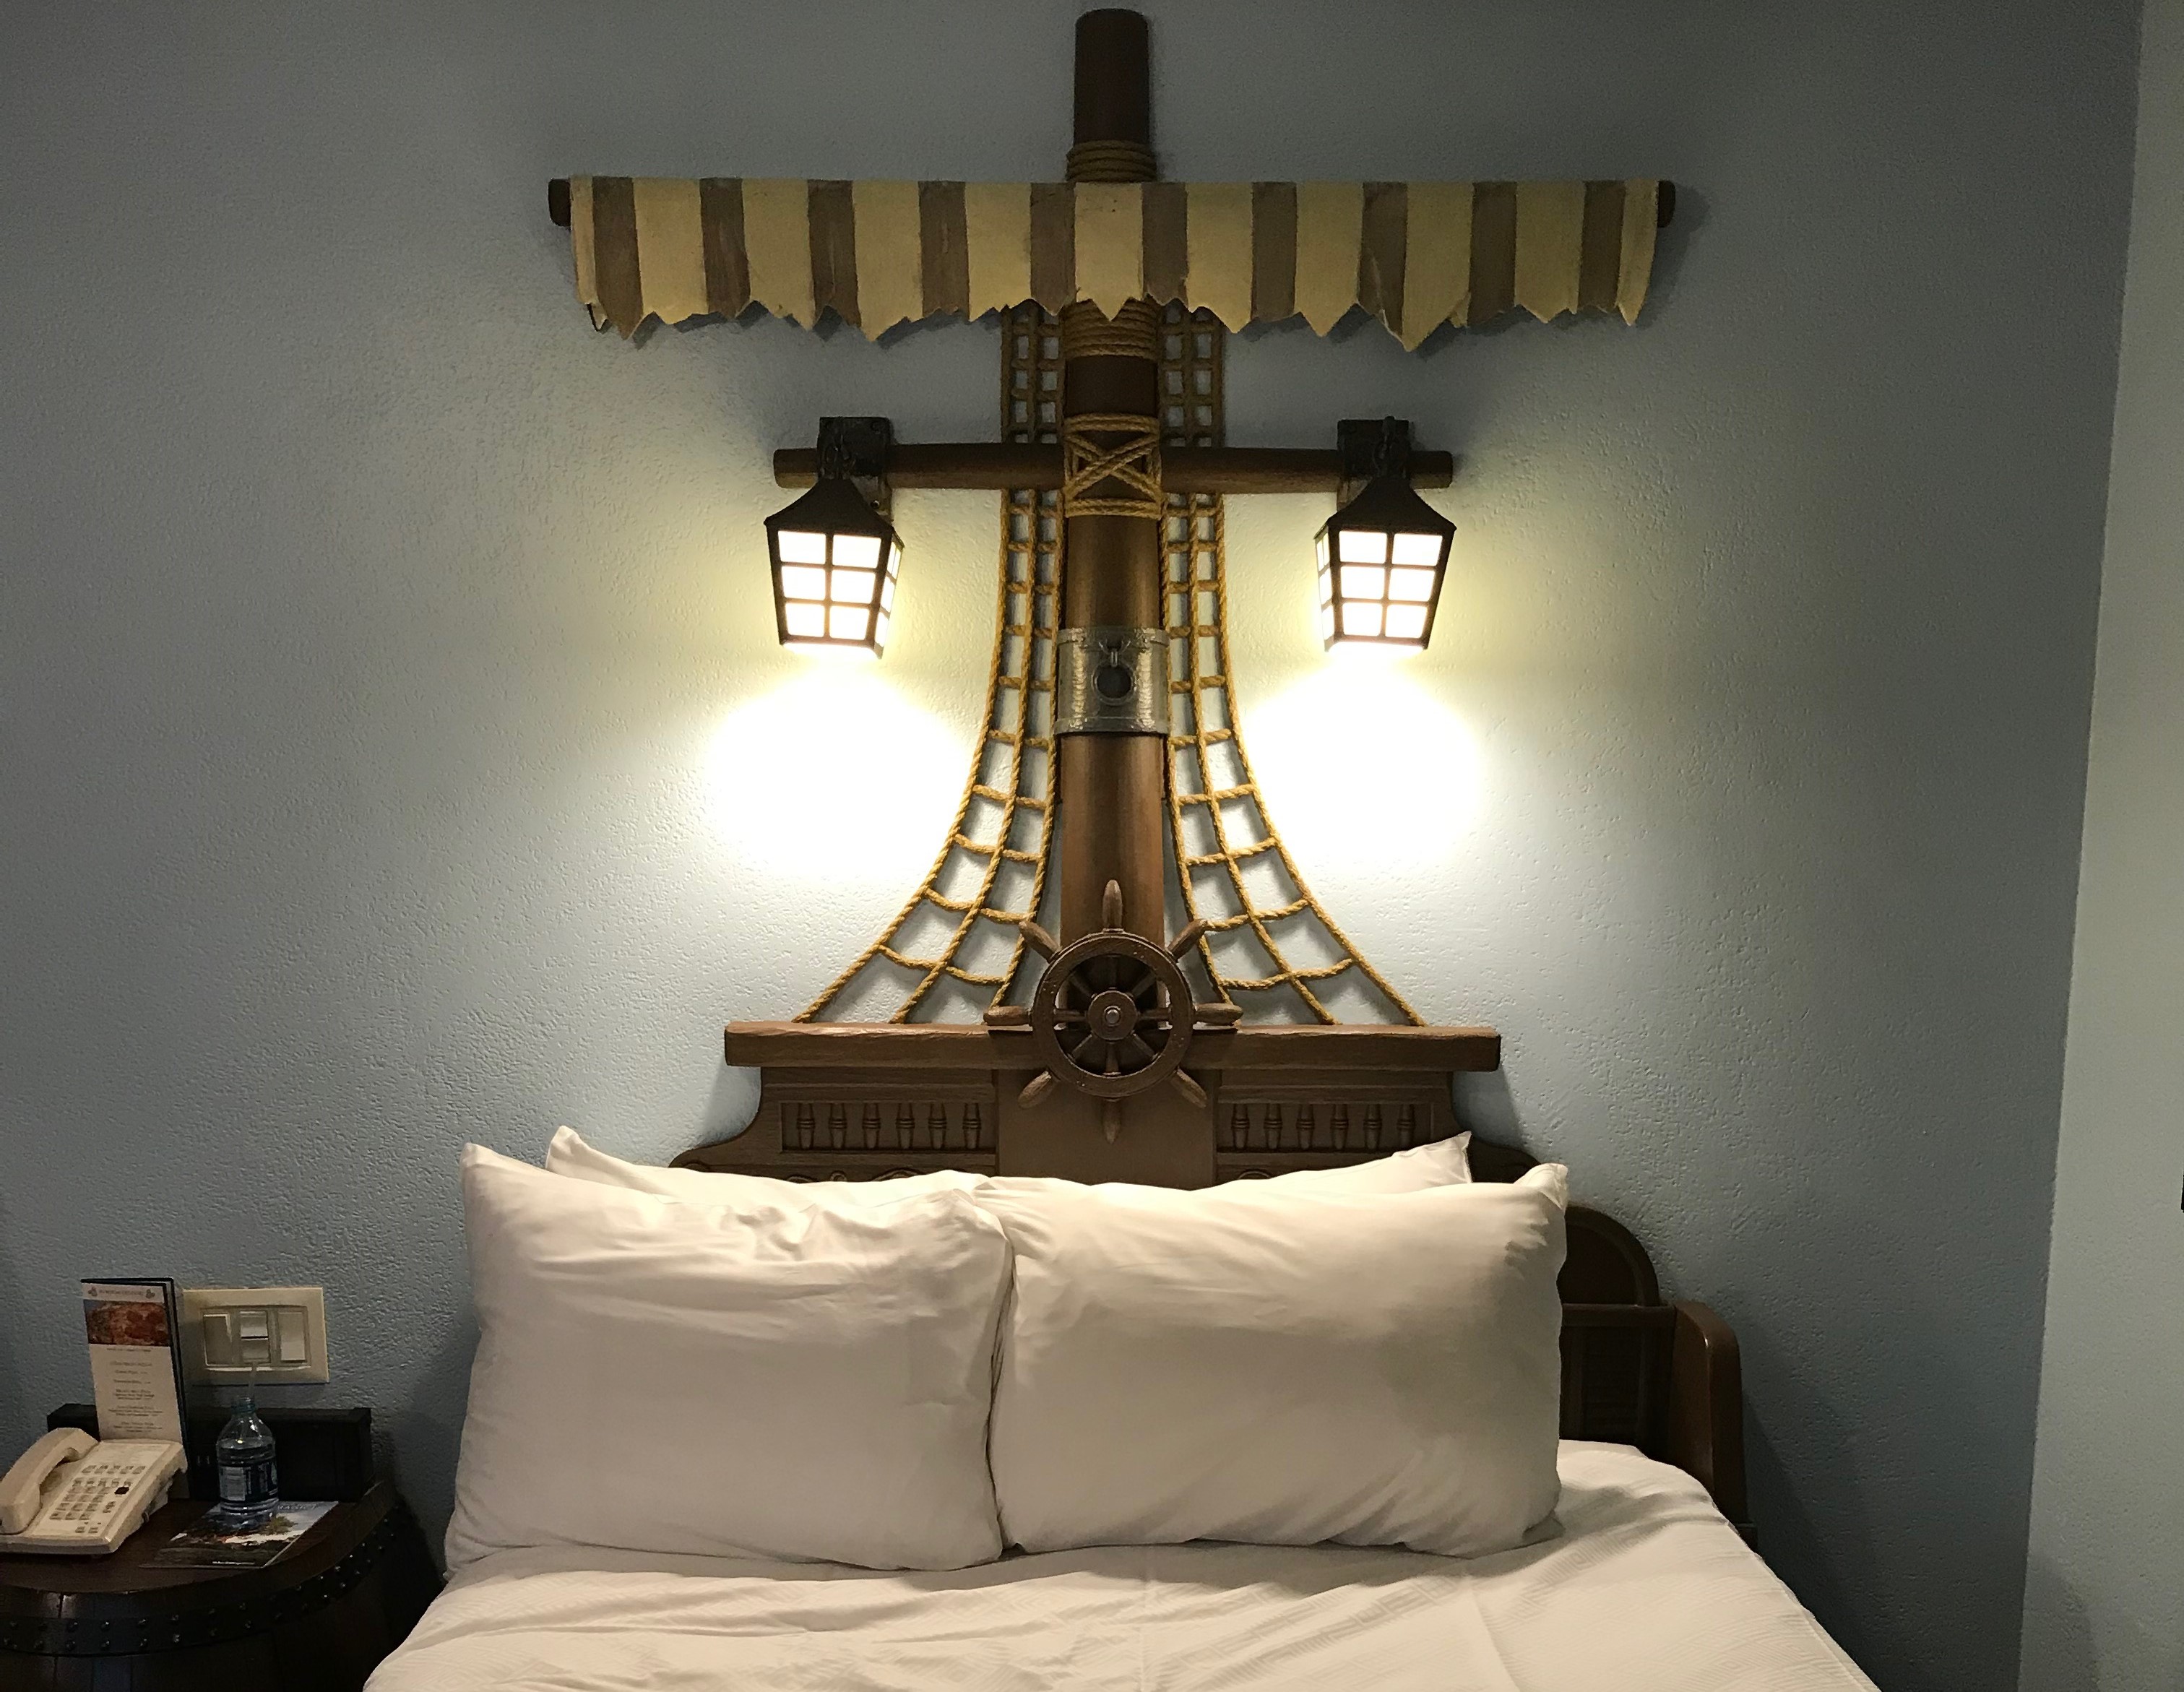 Review Of A Pirate Themed Room At Disney’s Caribbean Beach Resort